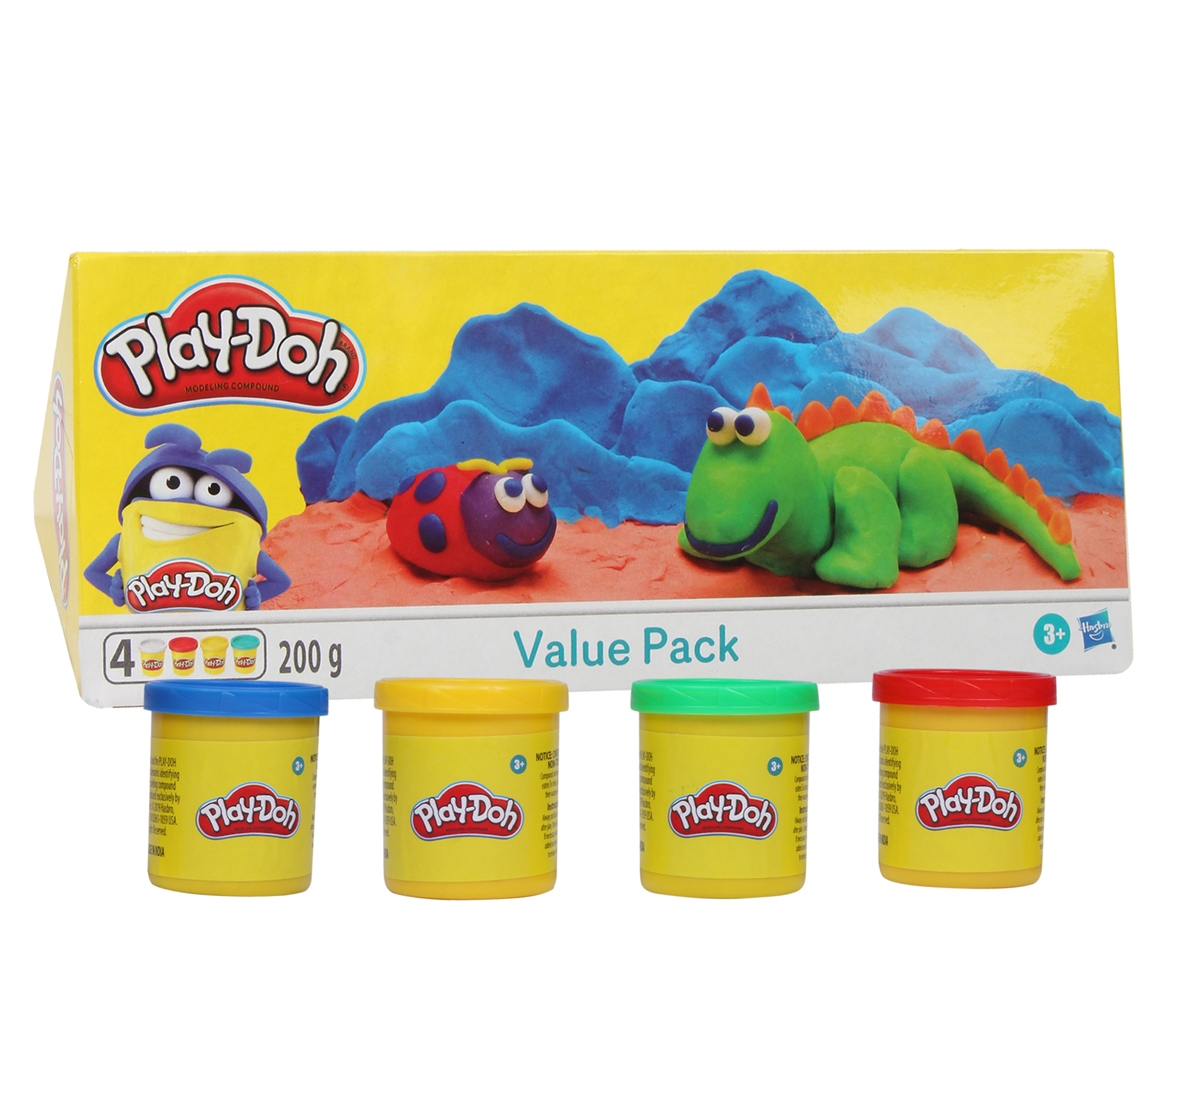 Play-Doh | Play Doh Value Pack of 4 with 2 Ounce Cans for kids 3Y+, Multicolour 0